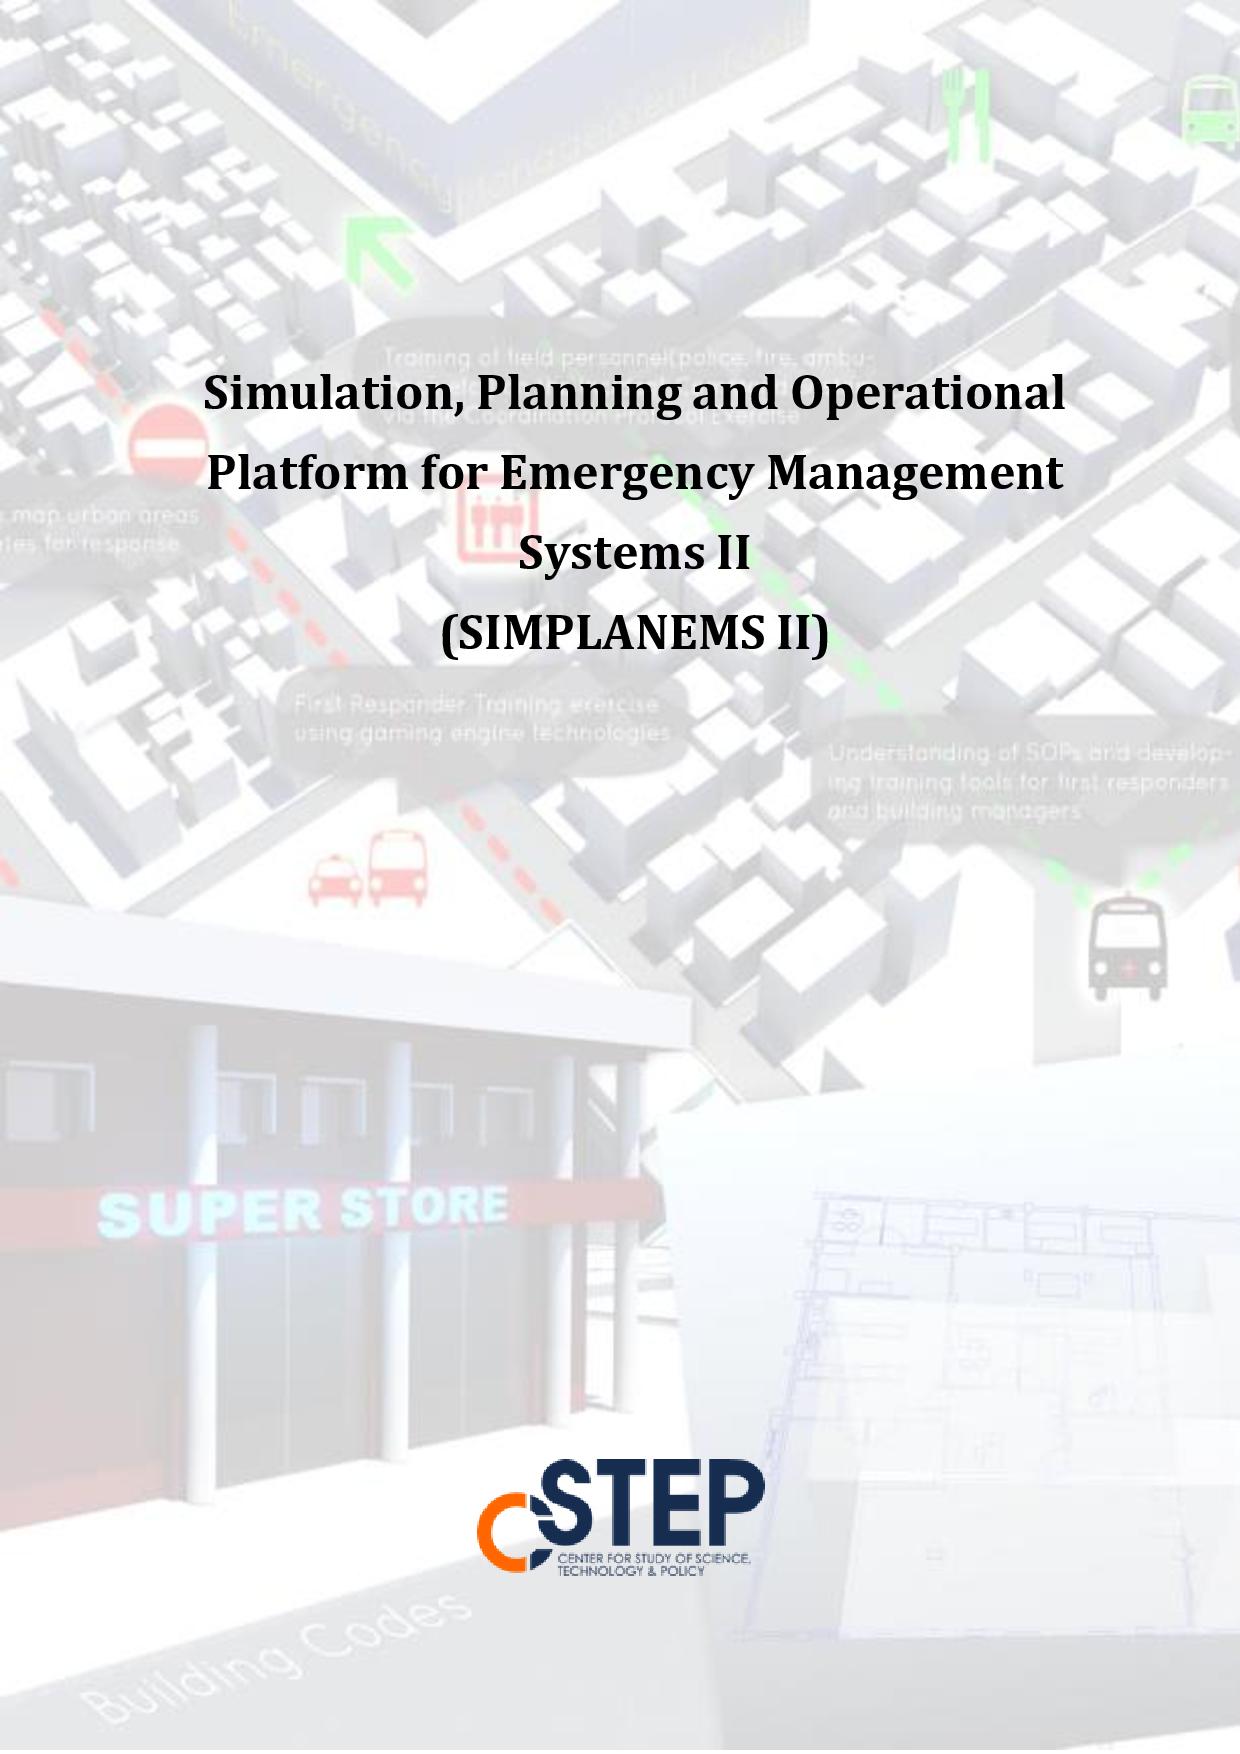 Simulation, Planning and Operational Platform for Emergency Management Systems II (SIMPLANEMS II)